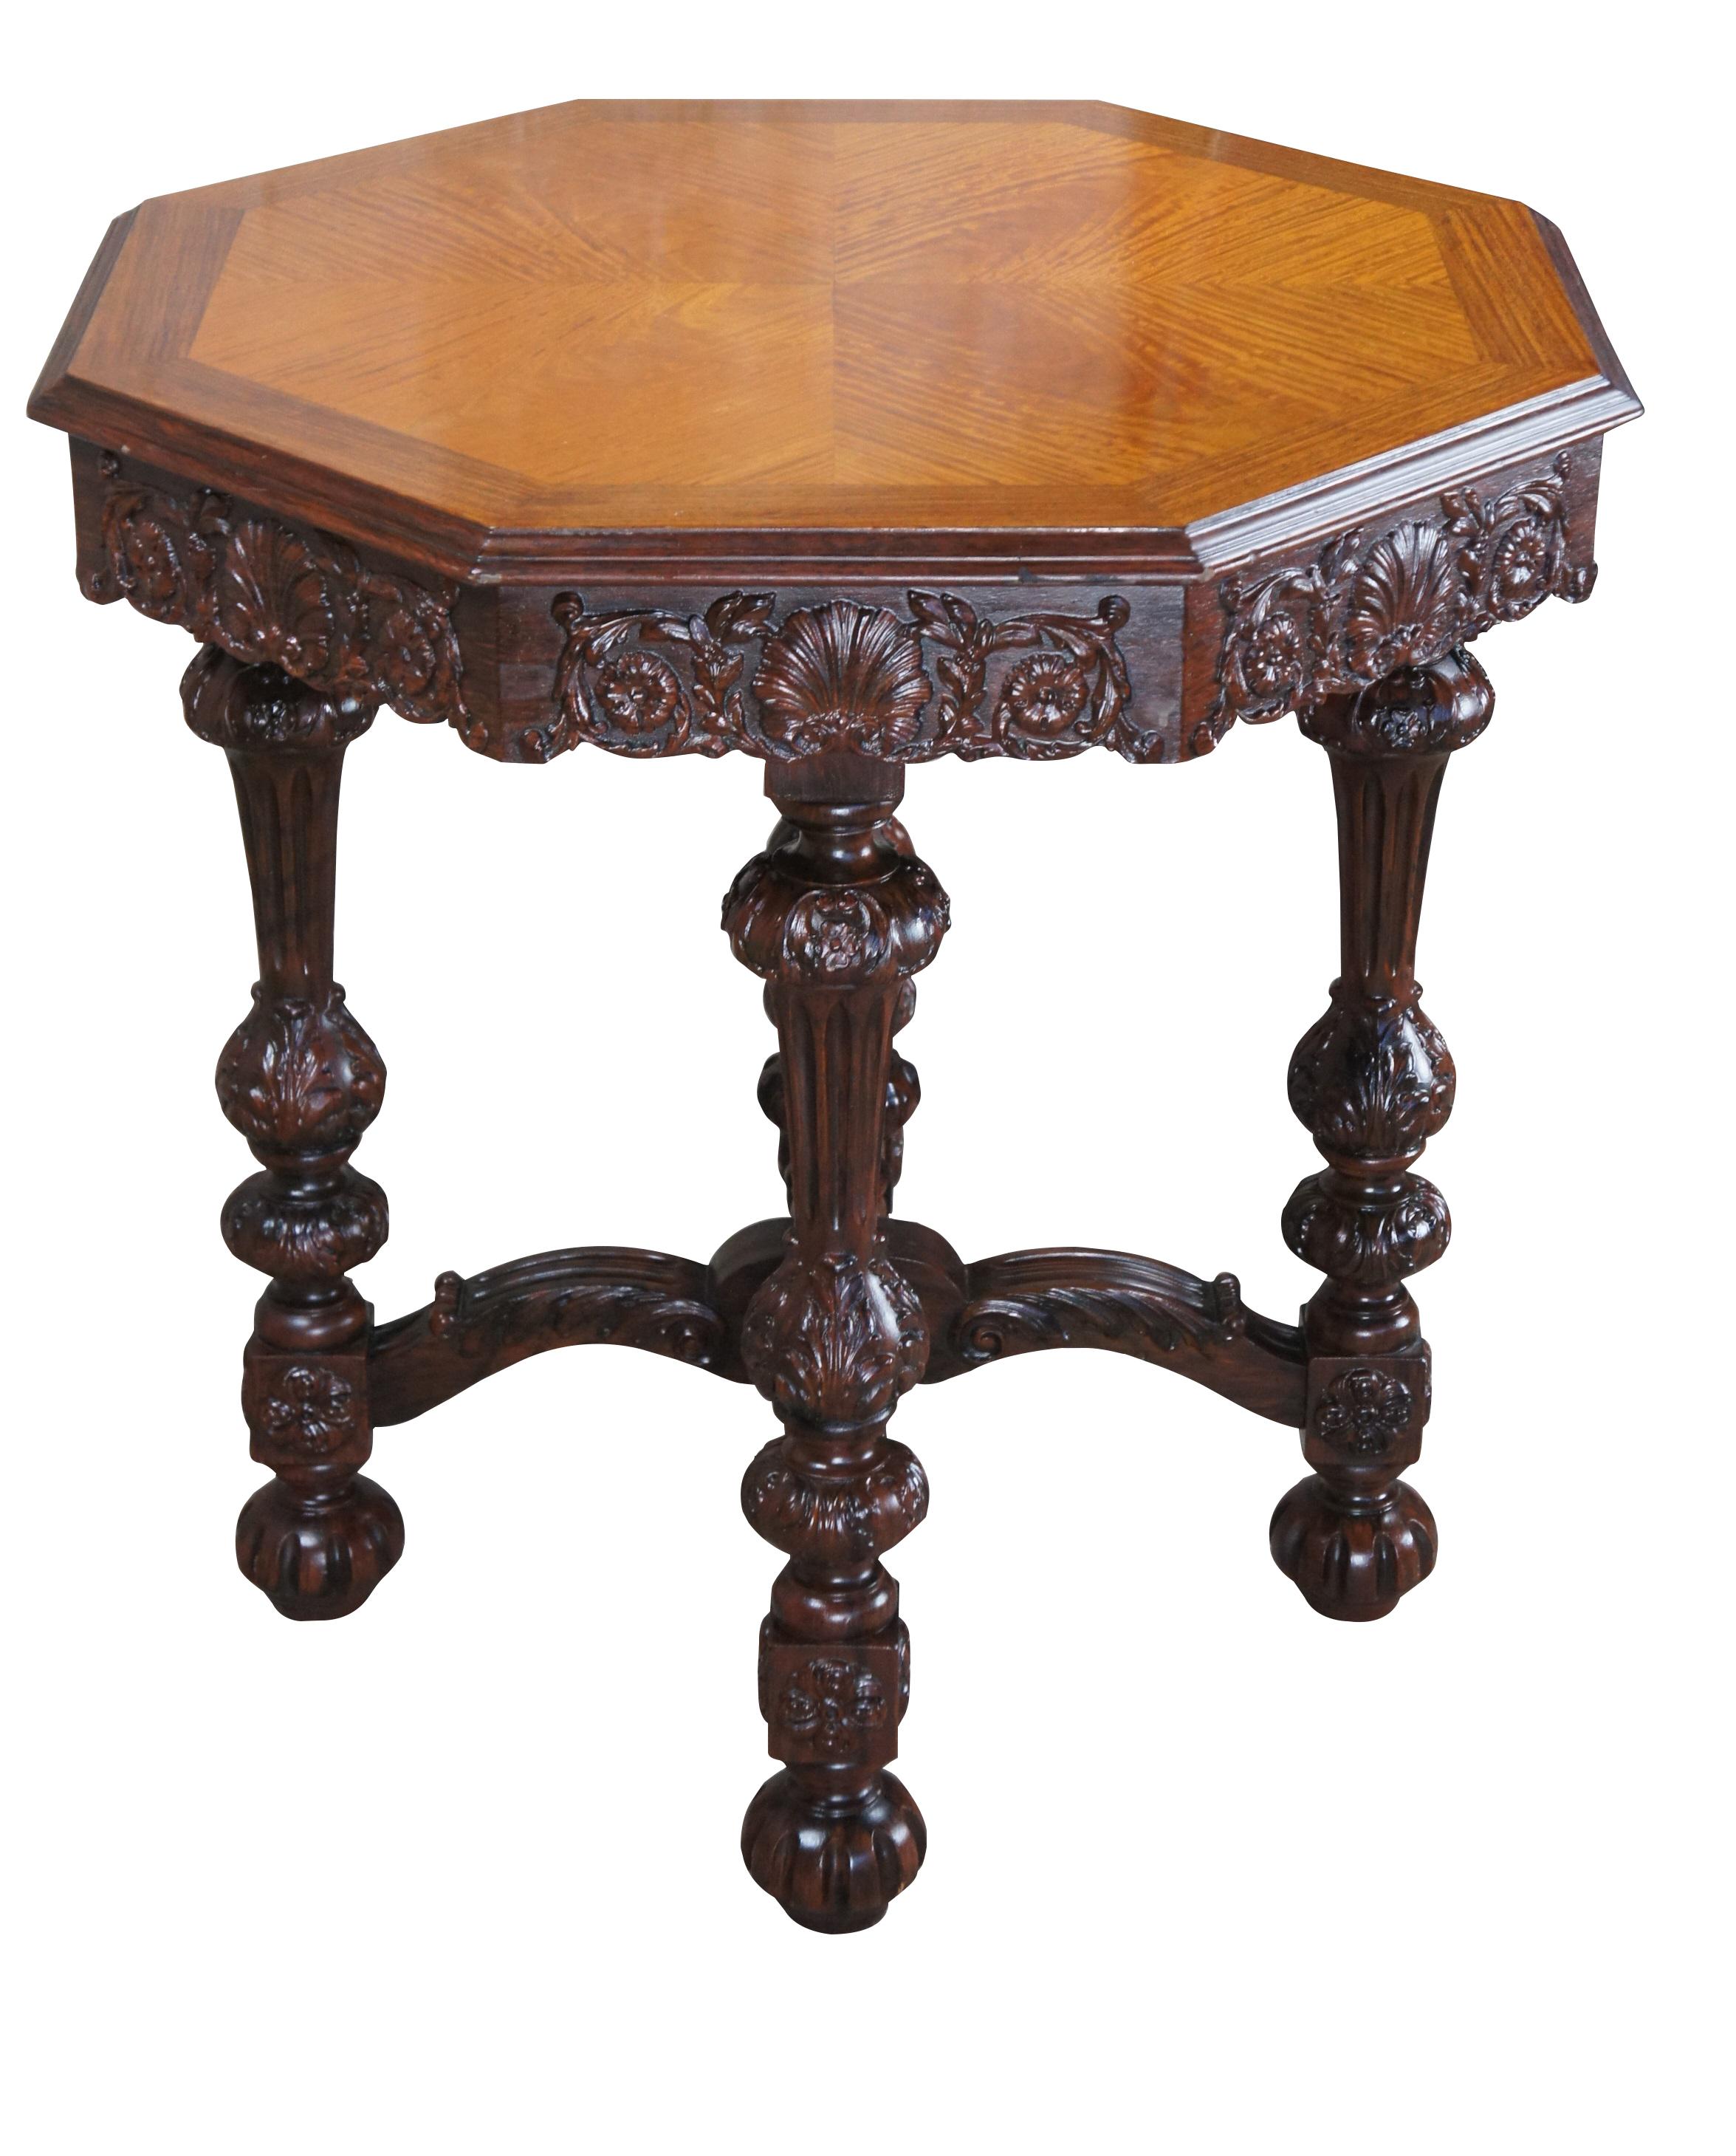 An impressive Octagonal center or side table by Johnson Hadley Johnson, circa 1930s.  Made from walnut with a matchbook veneered satinwood top.  Drawing insipration from French and Italian Baroque styling.  Features a scalloped carved and foliate